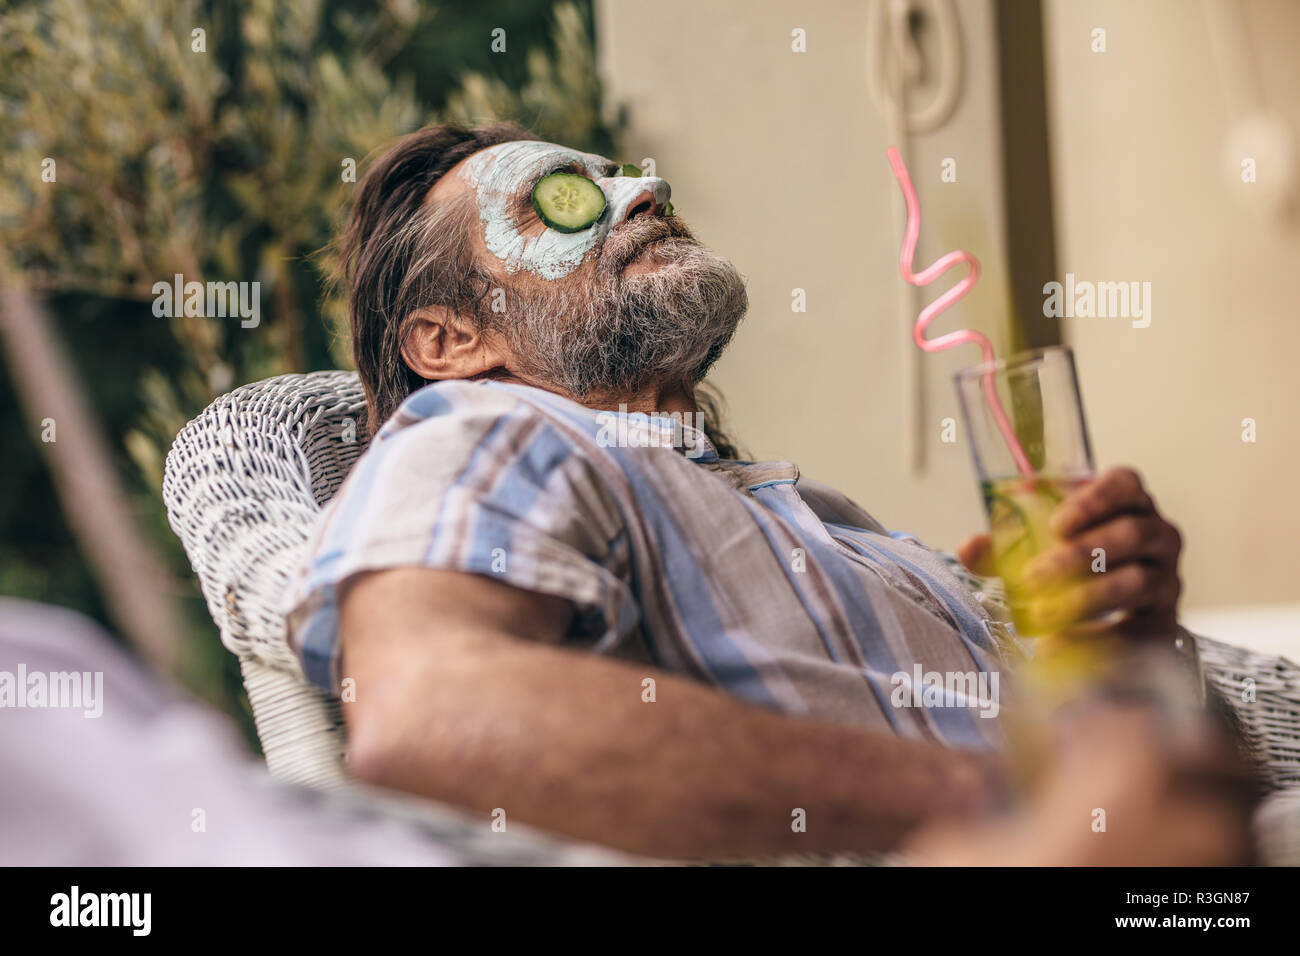 Relaxed elderly man sitting on chair with facial mask on face holding a glass of juice. Retired man relaxing with clay mask on face. Stock Photo